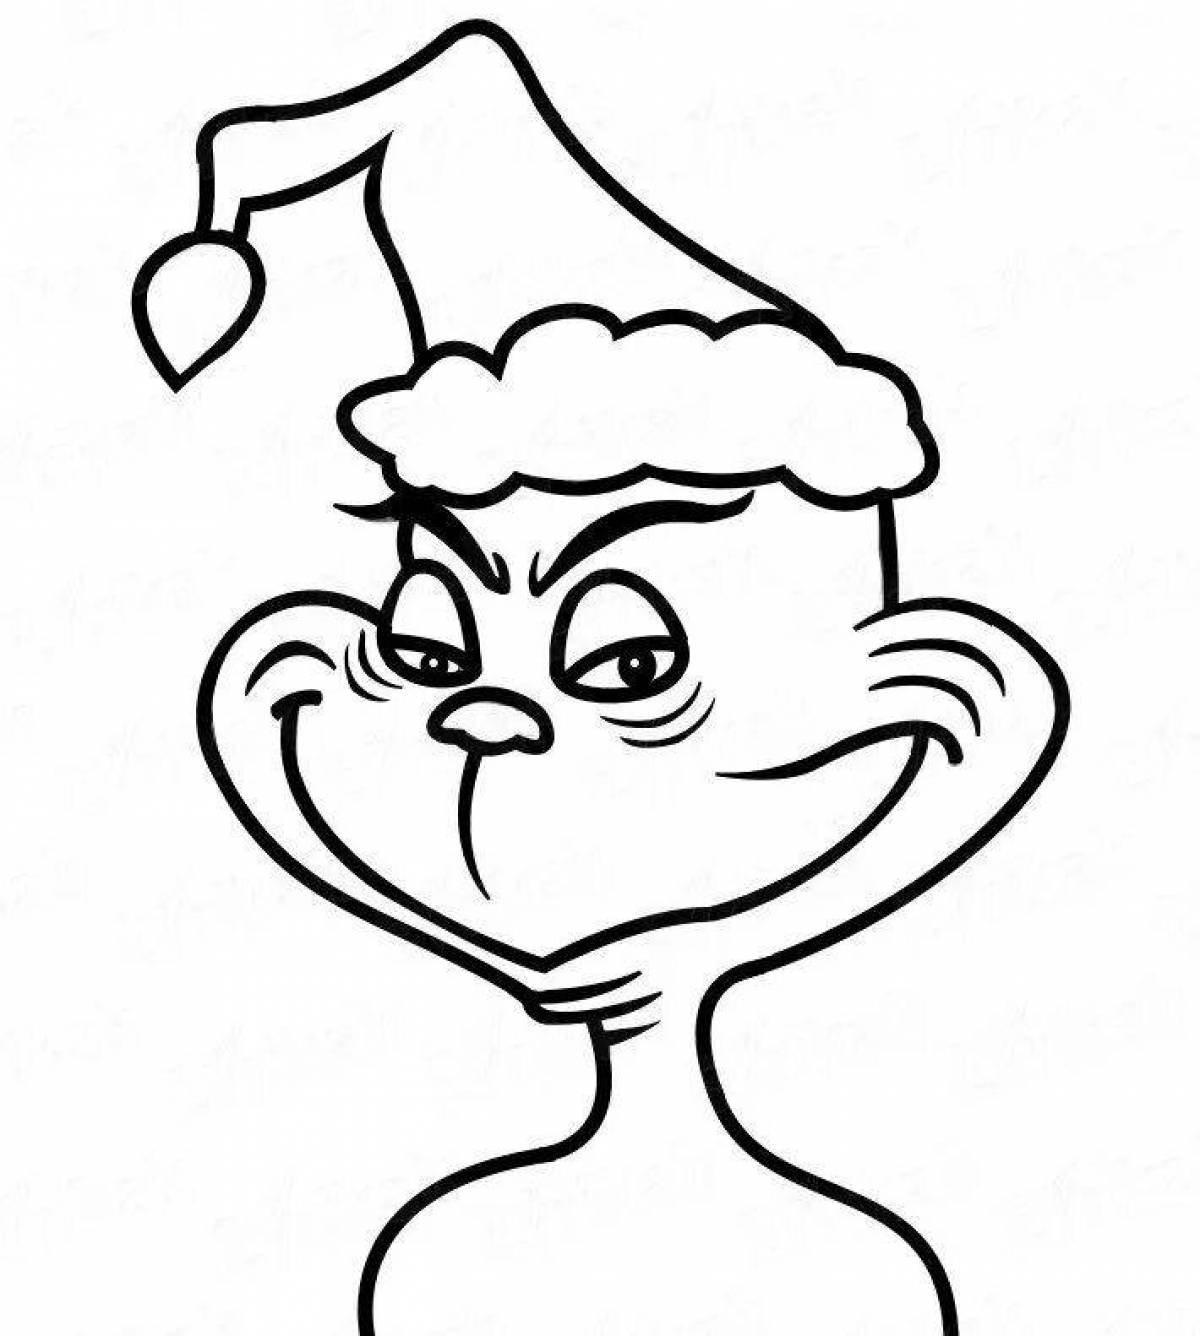 Dazzling Grinch Stole Christmas coloring page